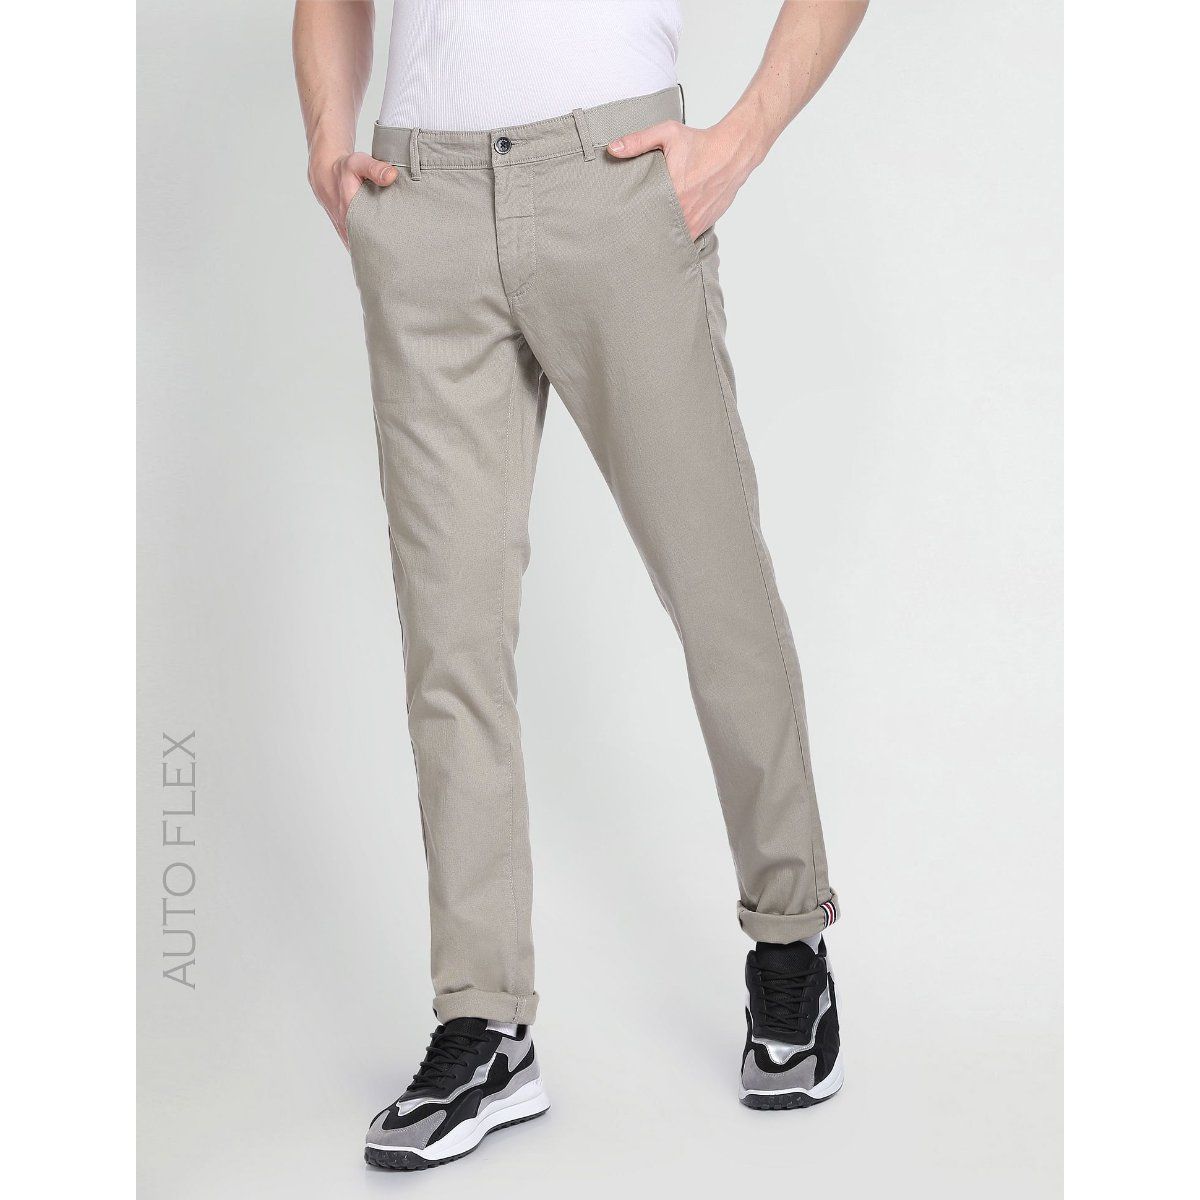 Arrow Nyc Pant  Get Best Price from Manufacturers  Suppliers in India